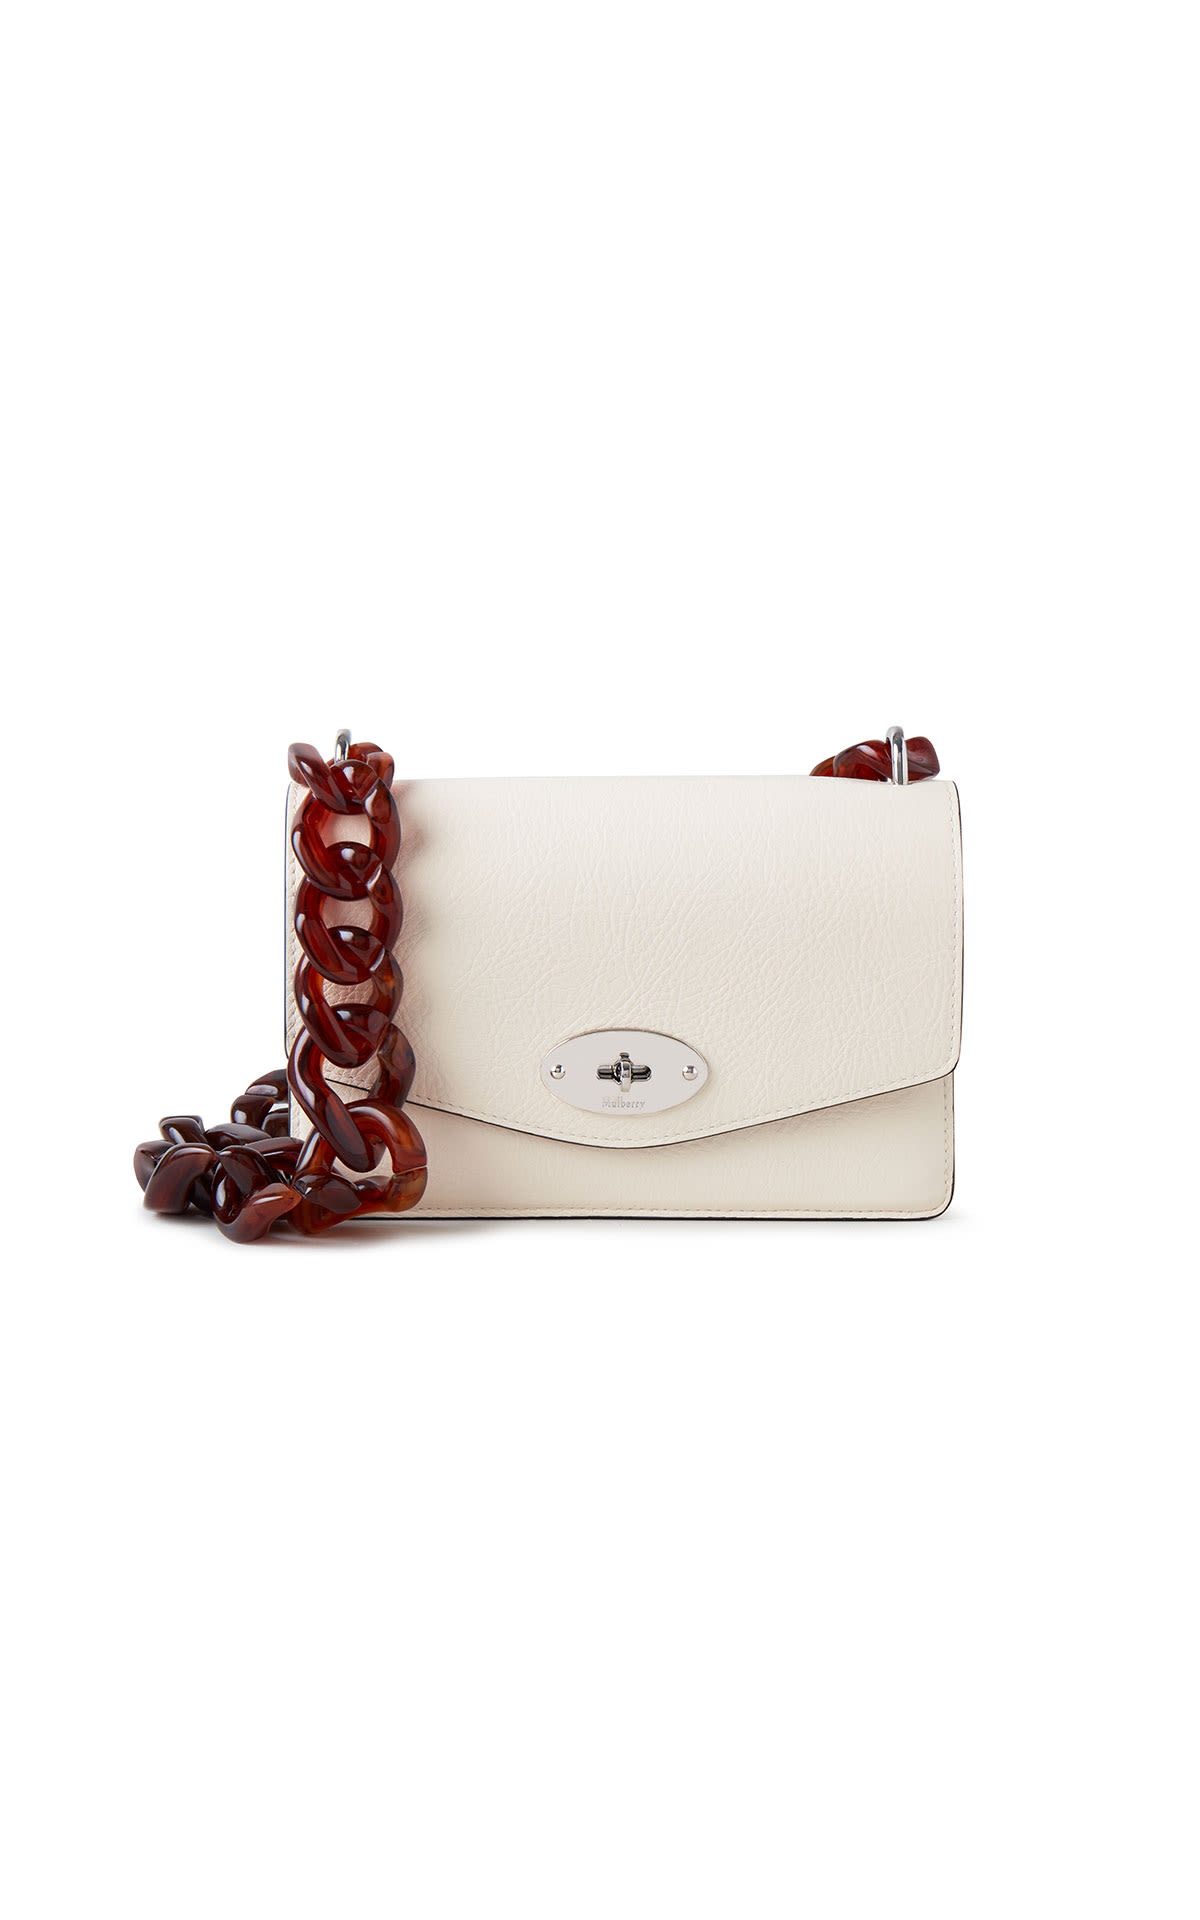 Mulberry Small darley high shine leather from Bicester Village